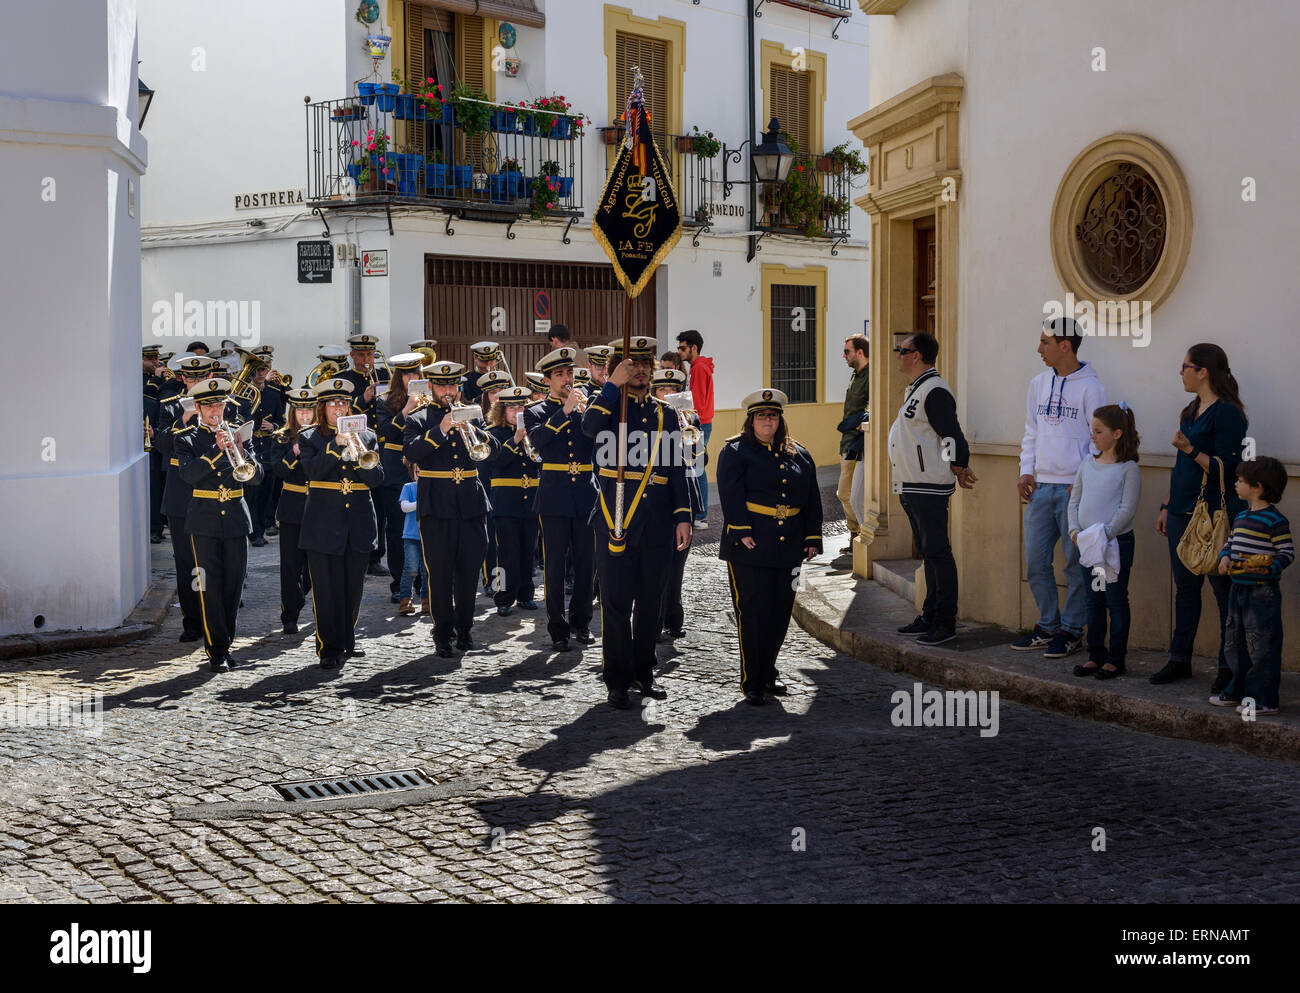 Marching band in Cordoba Spain Stock Photo